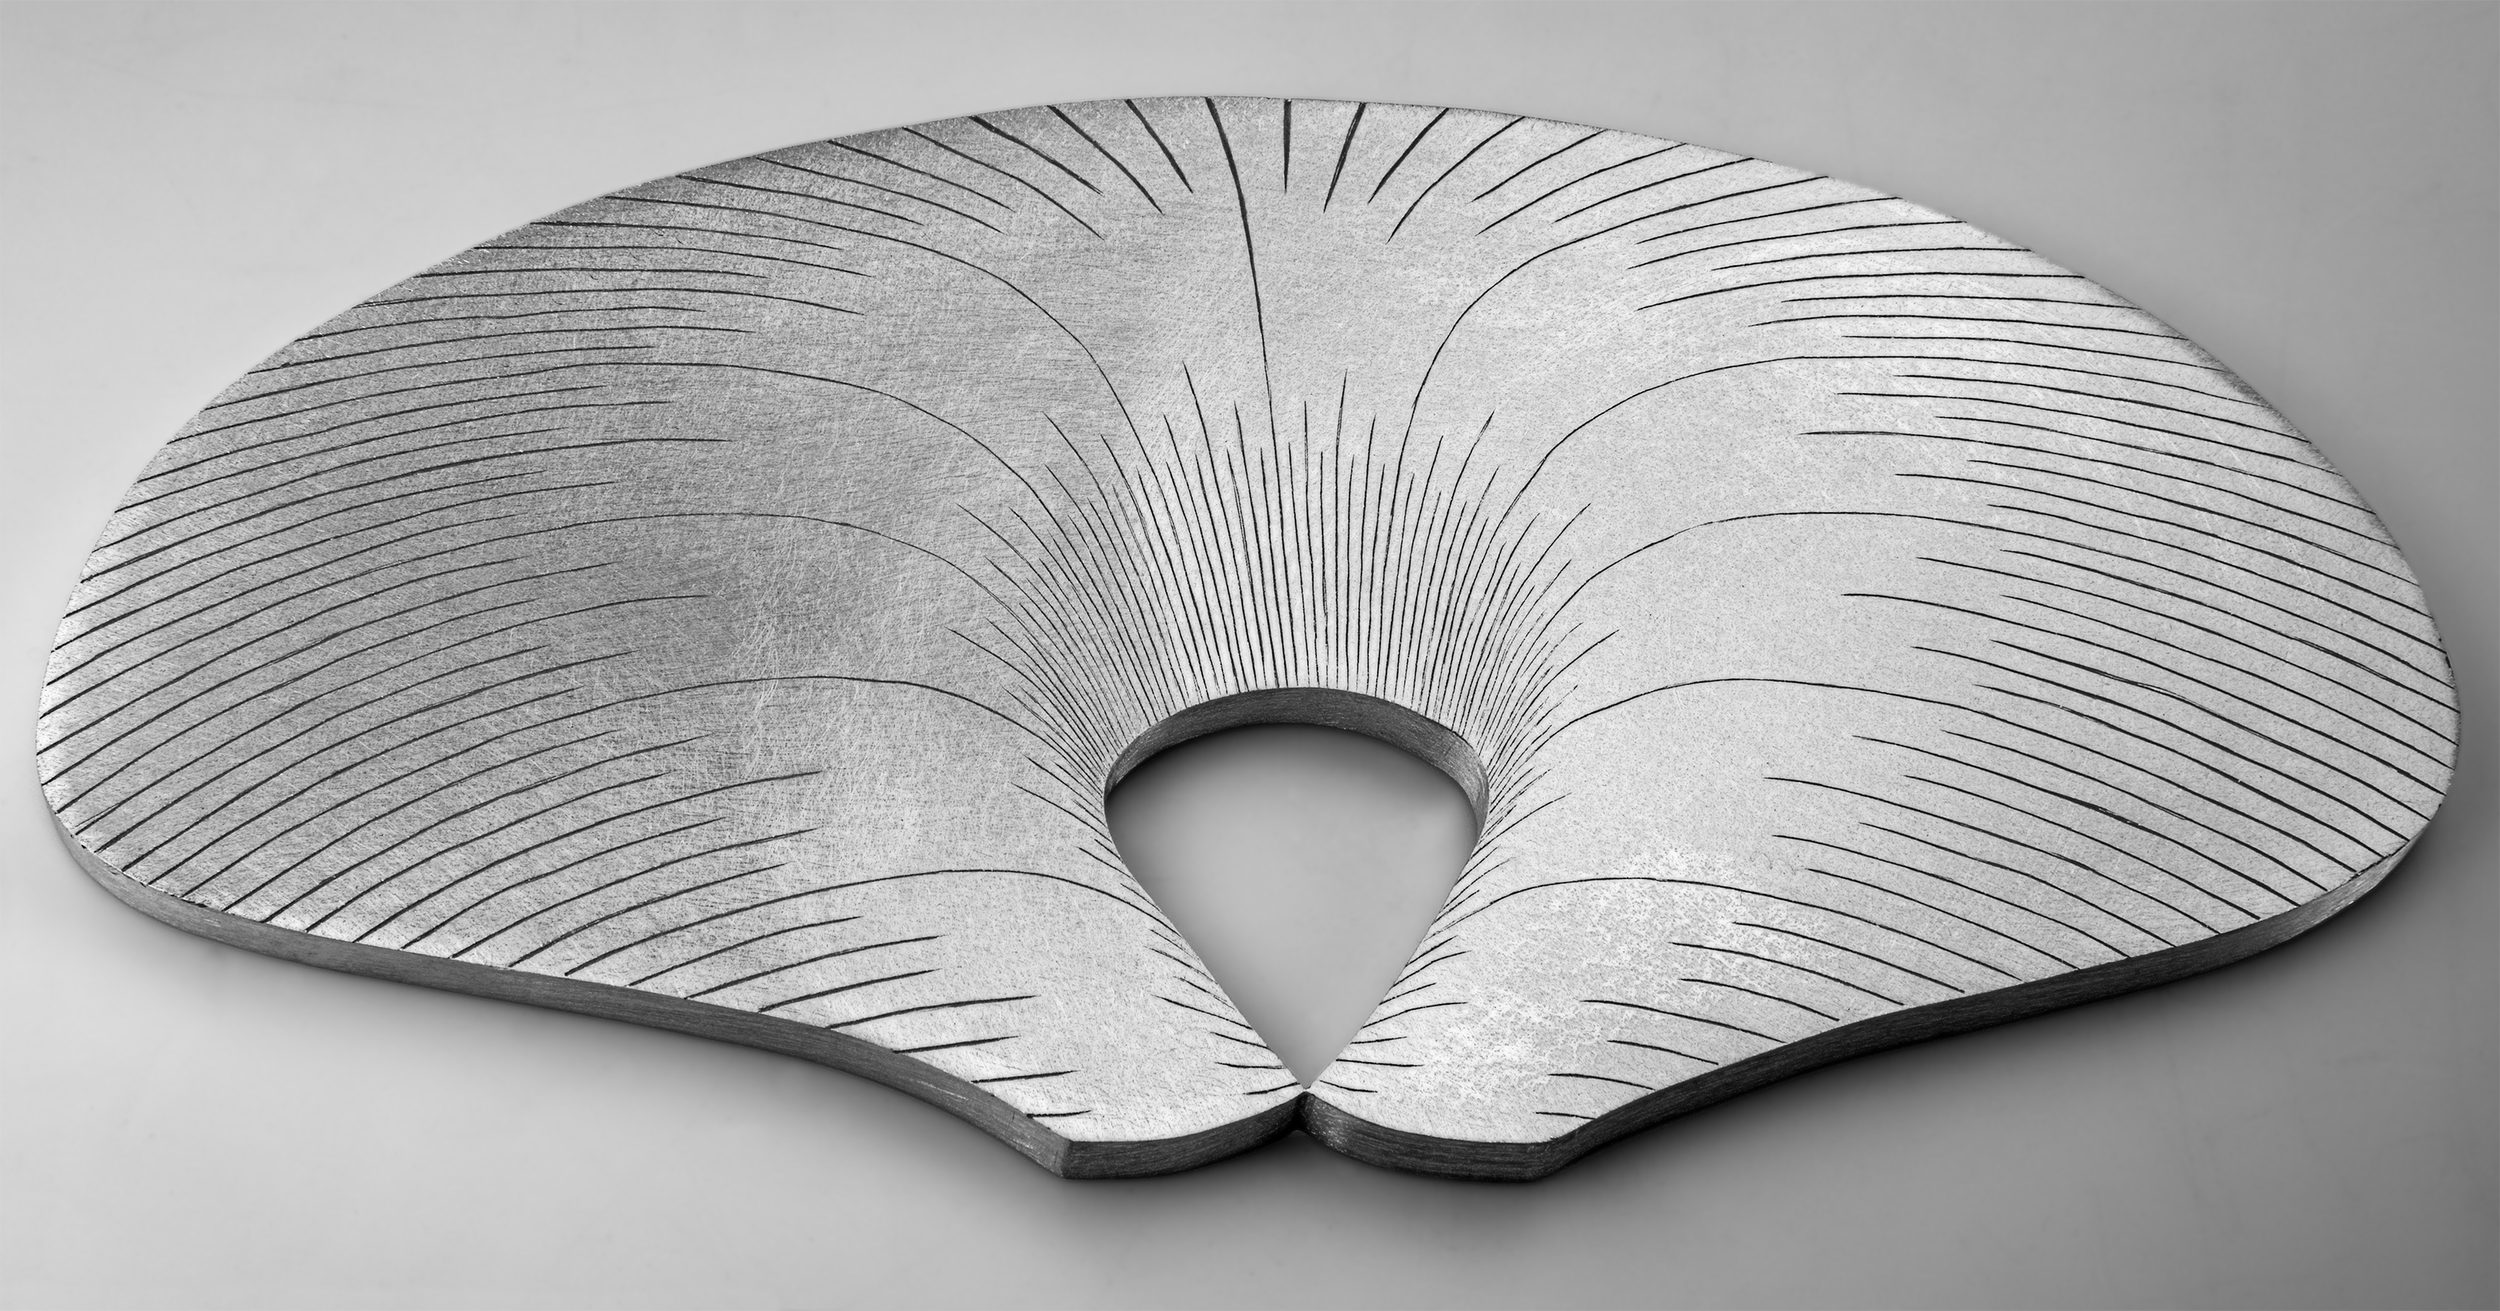 Instrument #146, hand engraved aluminum and ink, 9.75" x 5" x .25"